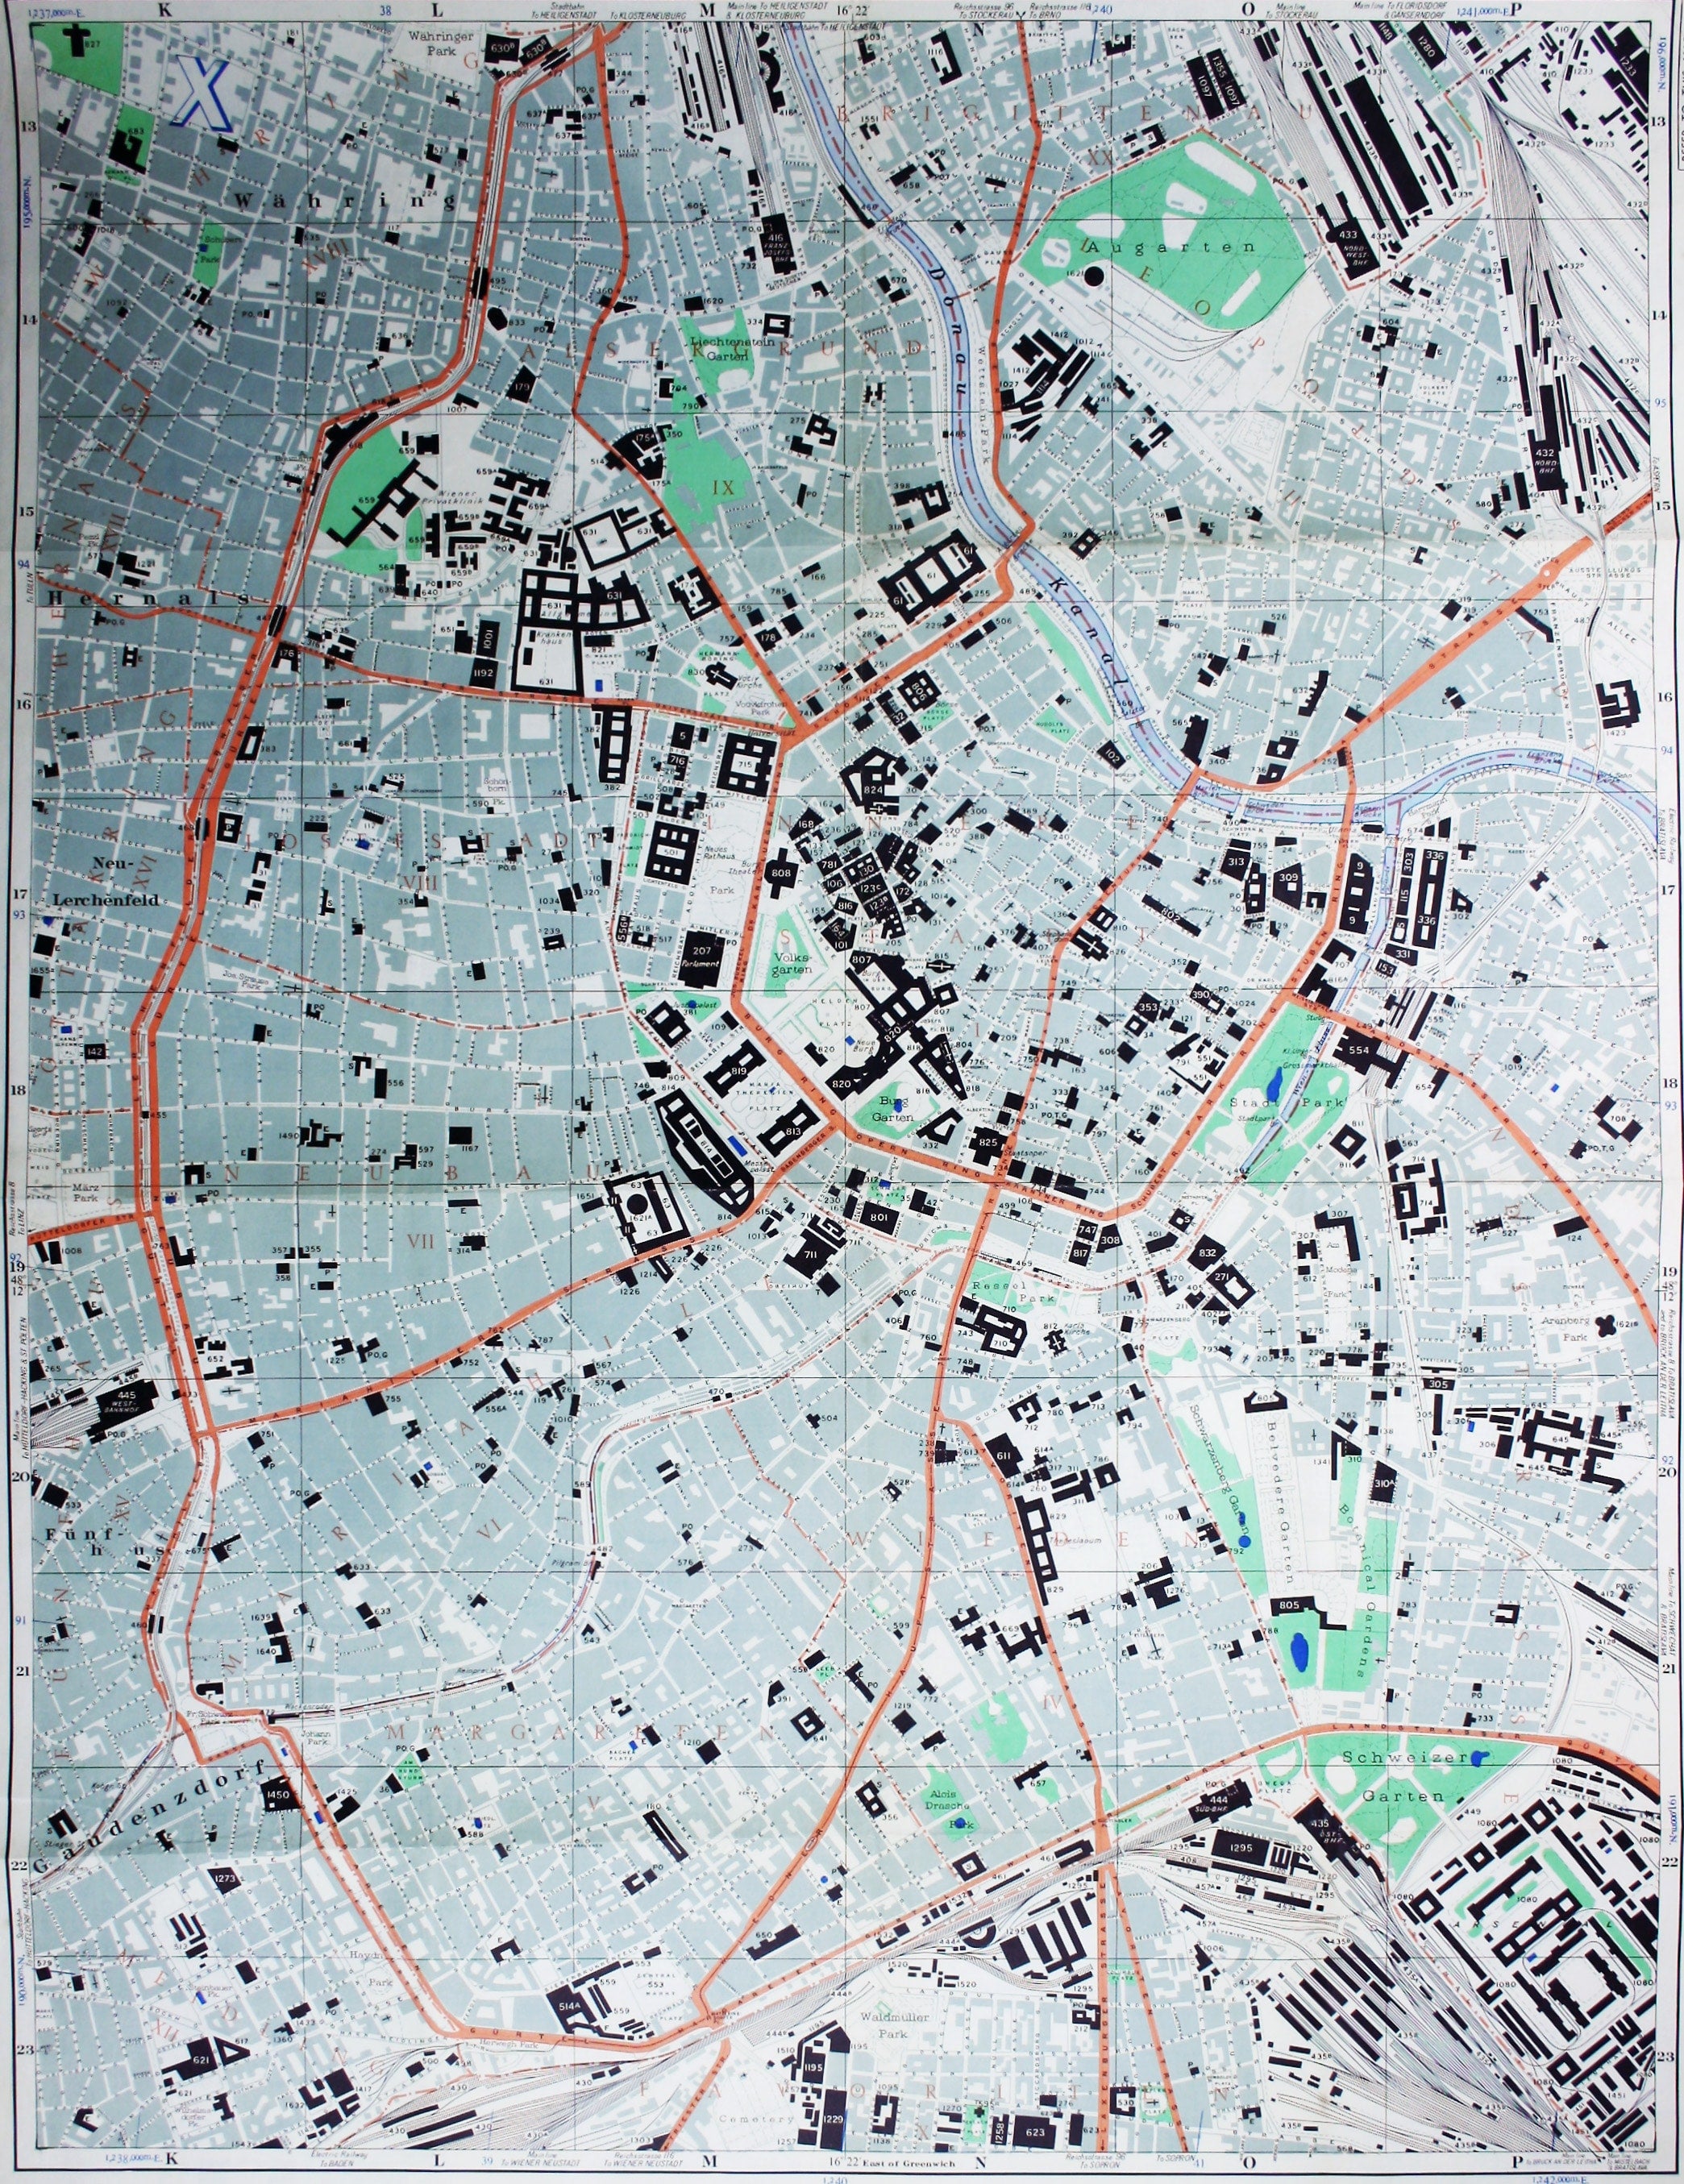 British Military Map of Harry Lime’s Vienna